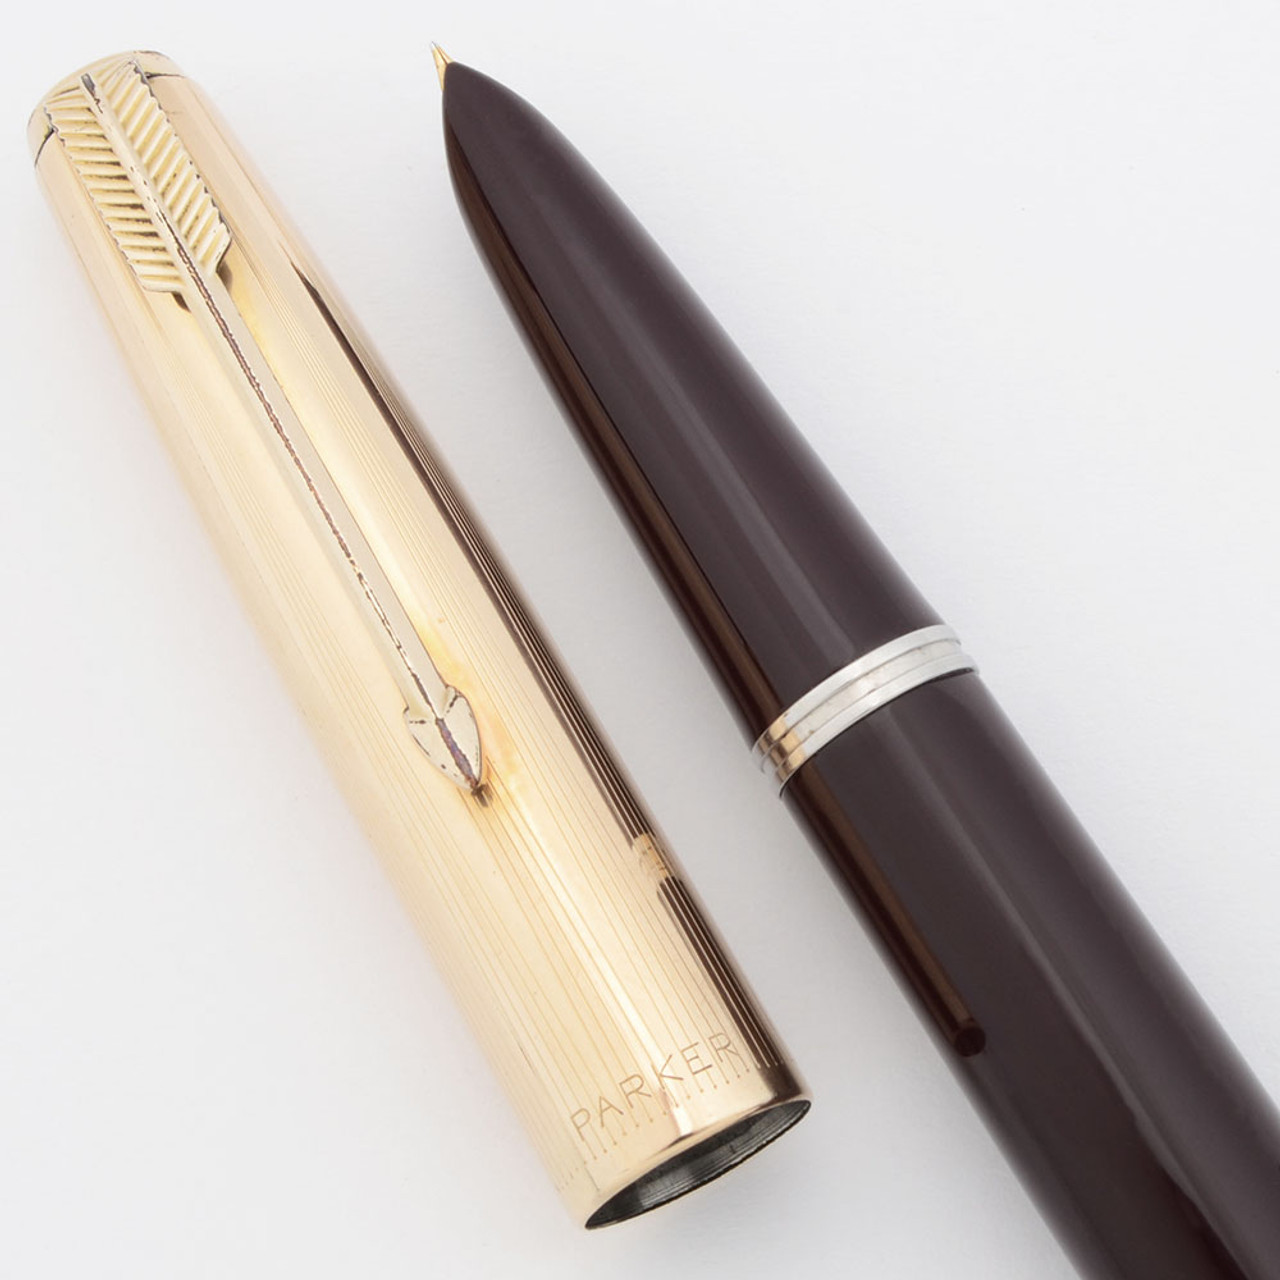 Parker 51 Aerometric (Post 1952) -  Burgundy, Gold Filled Converging Lines Cap, Fine Gold Nib (Excellent, Works Well)